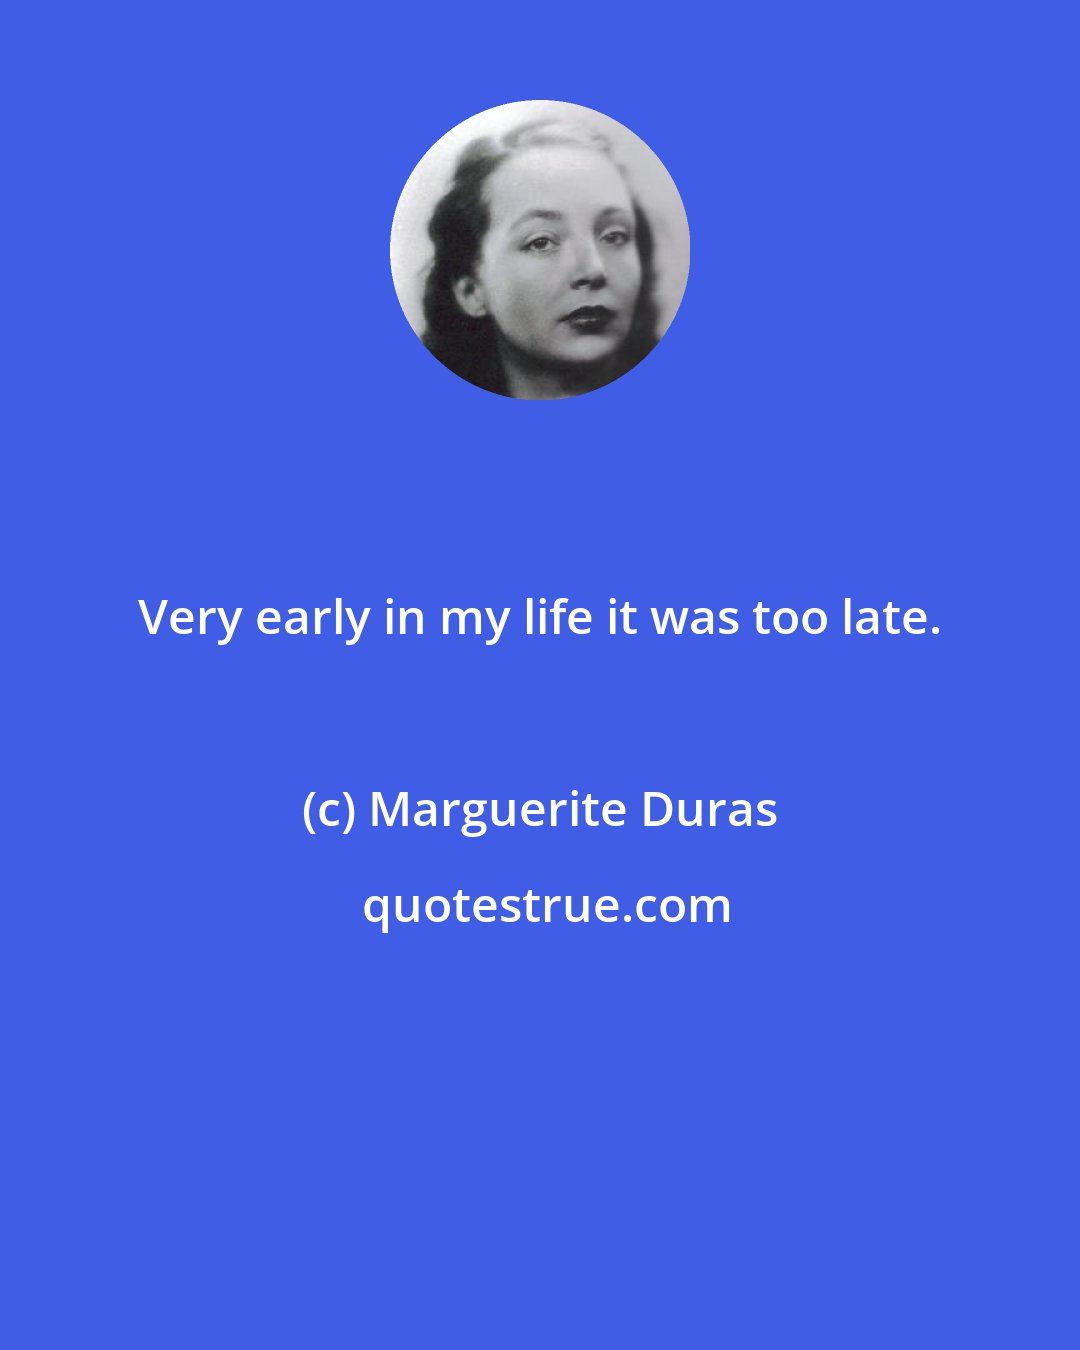 Marguerite Duras: Very early in my life it was too late.